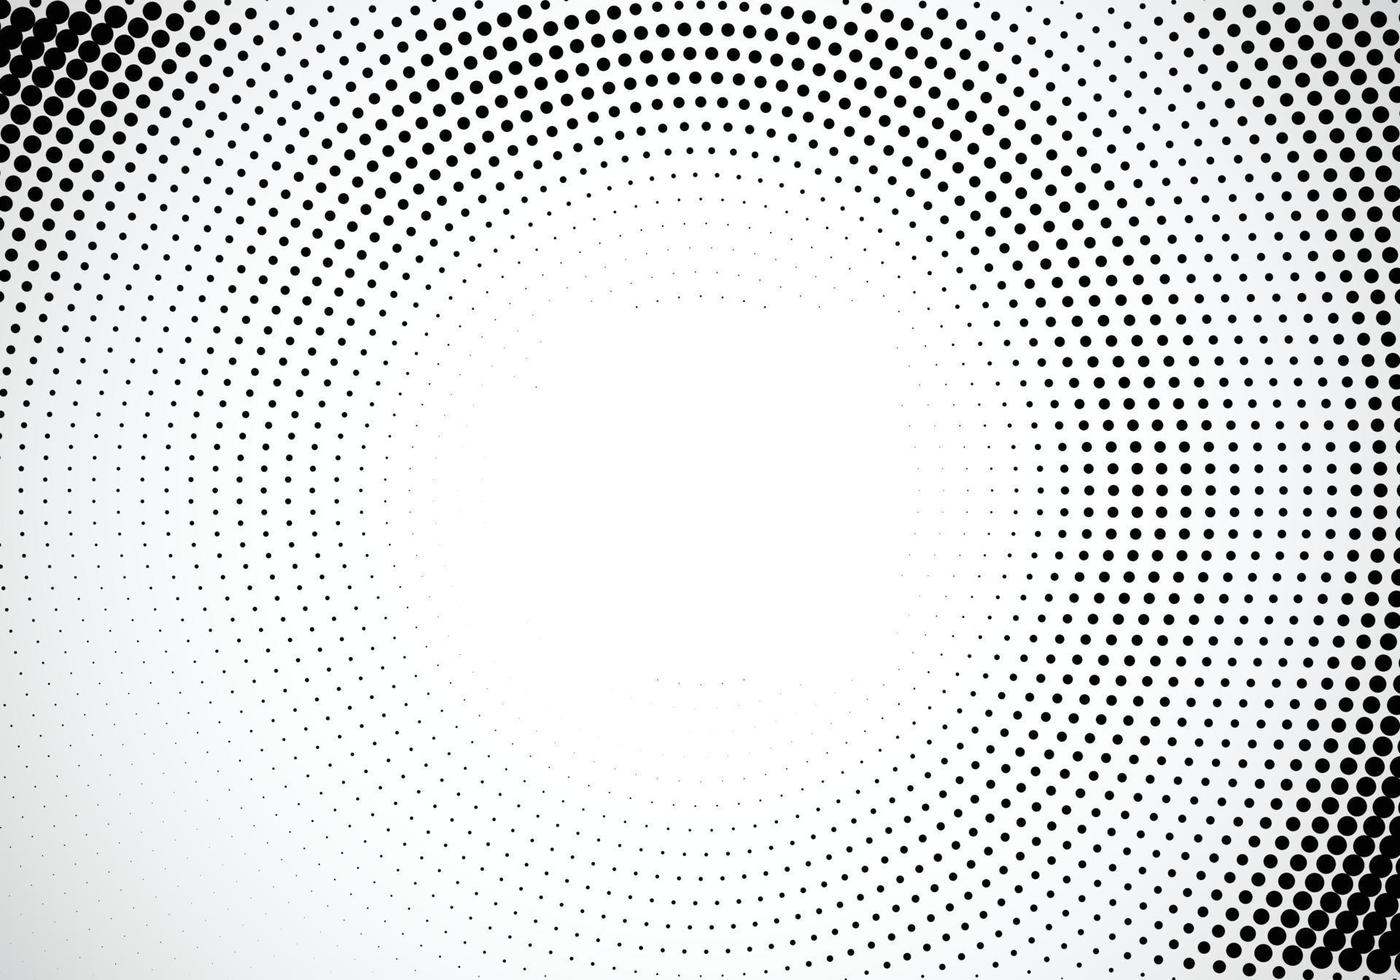 Abstract circular decorative black dotted background vector